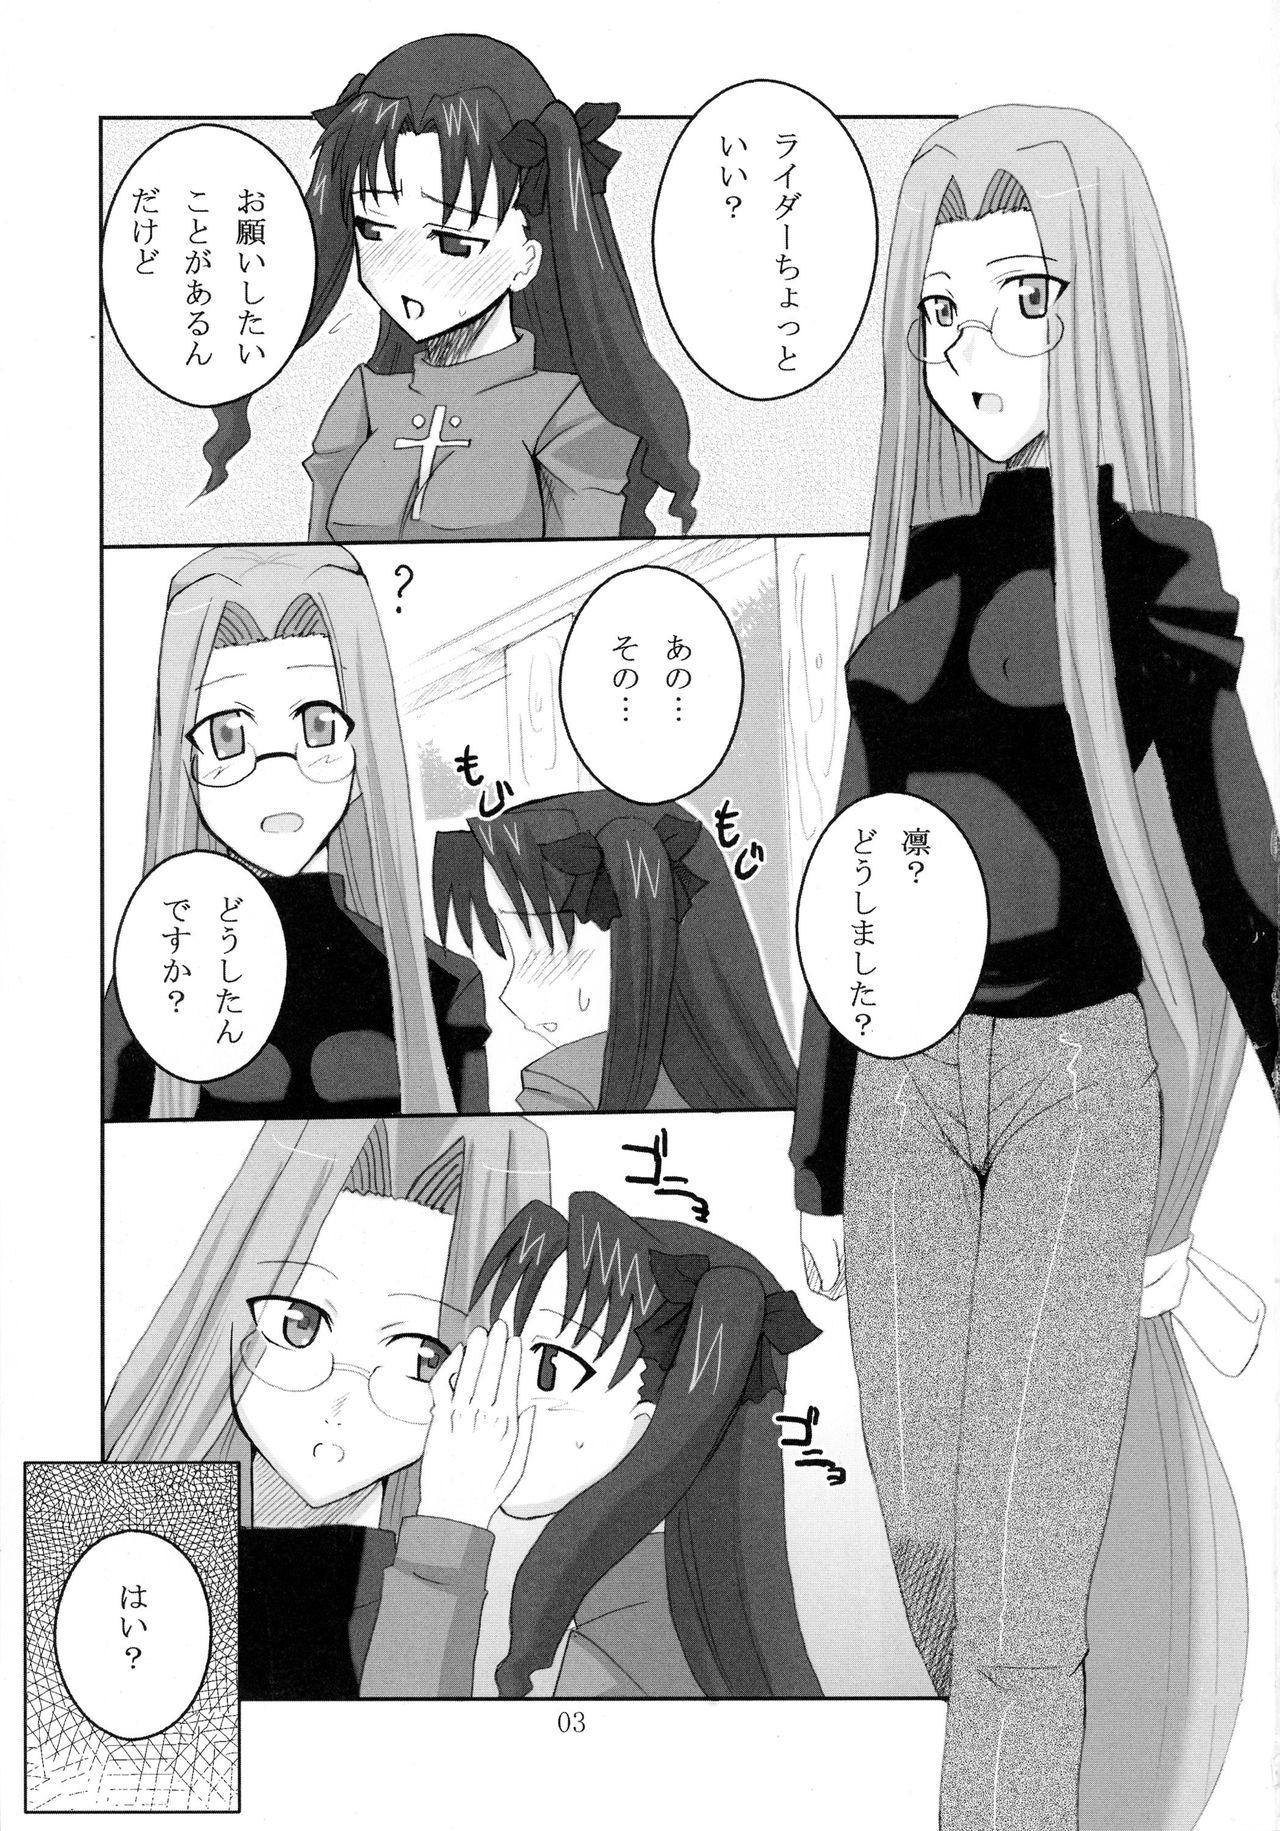 Por vain dream - Fate stay night Animation - Page 3